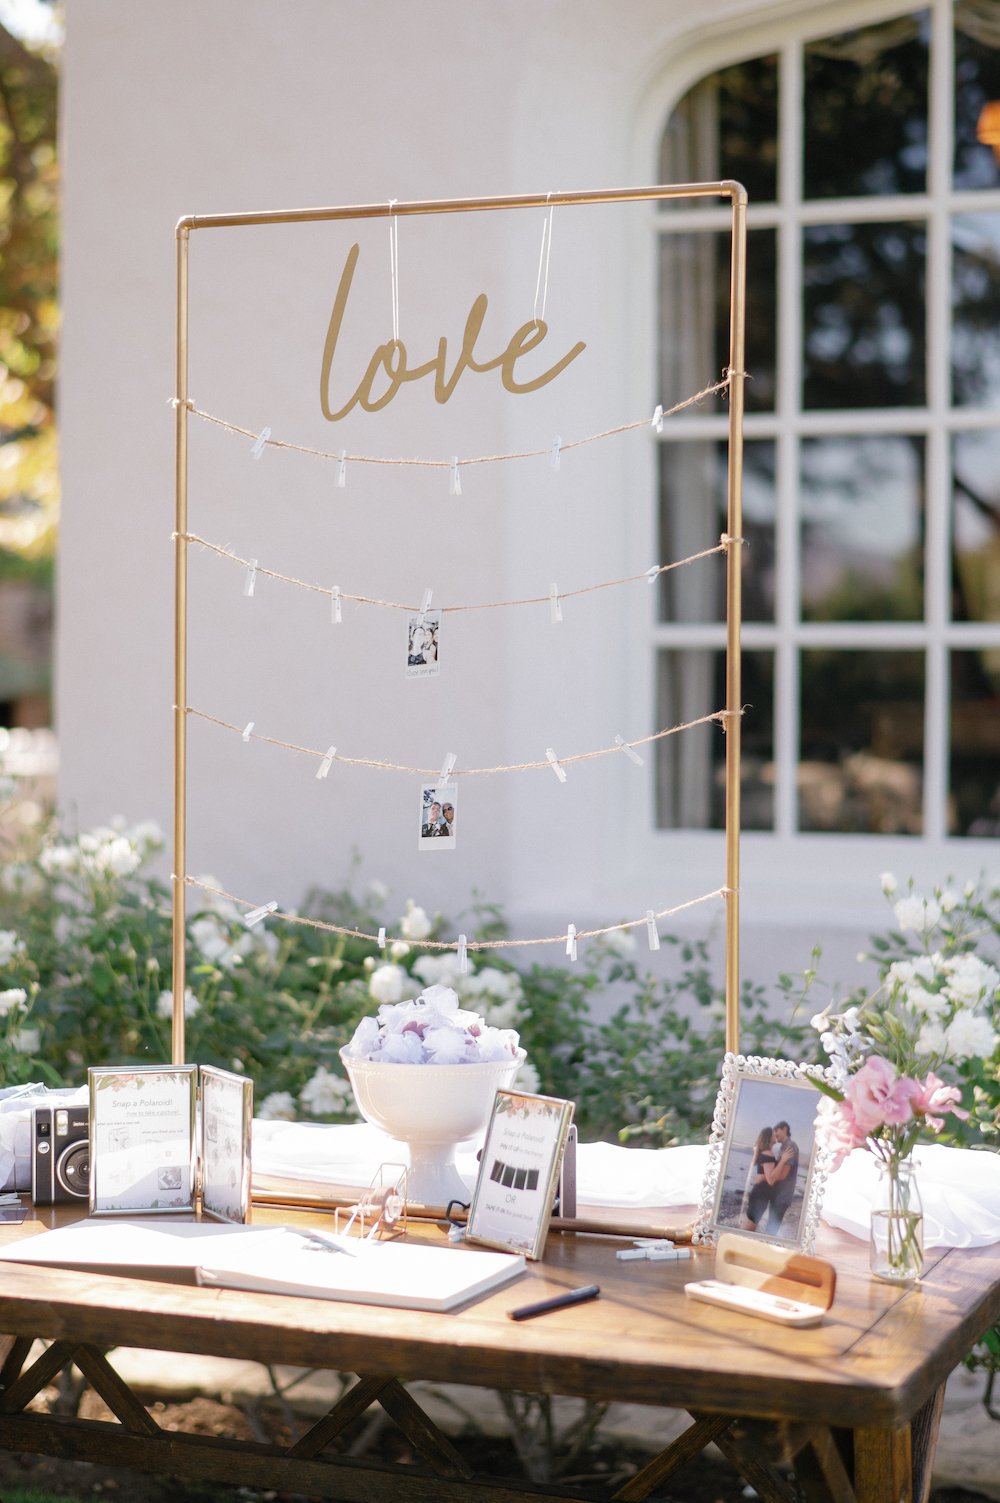 How To Setup A Polaroid Guest Book Station At Your Wedding